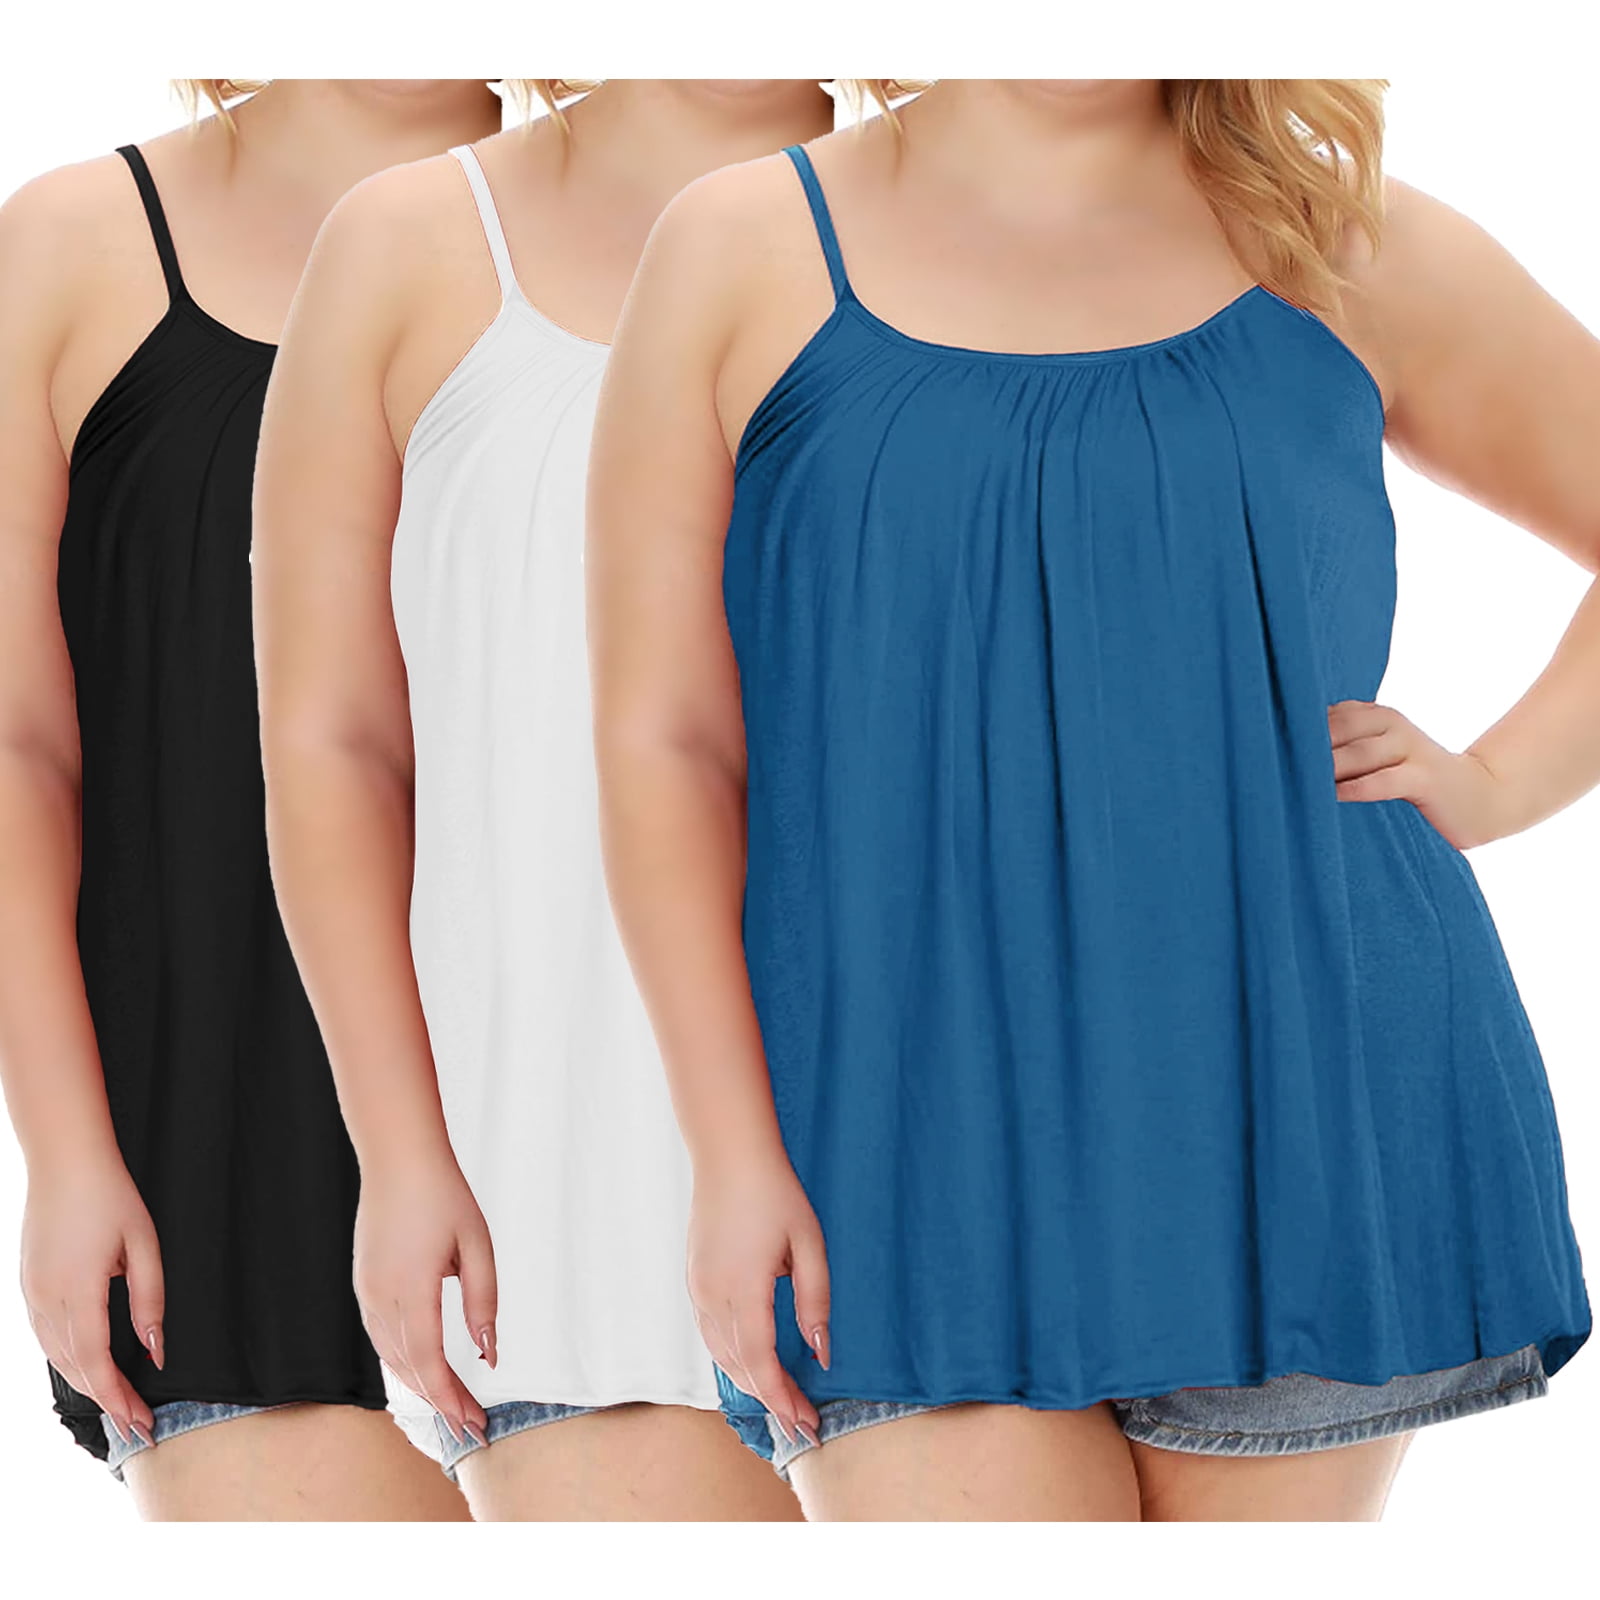 Anyfit Wear 3 Pack Women Tank Top with Built in Bra Flowly Relaxed Cami  Adjustable Straps Camisole with Pleats Black-White-Navy,2X-Large